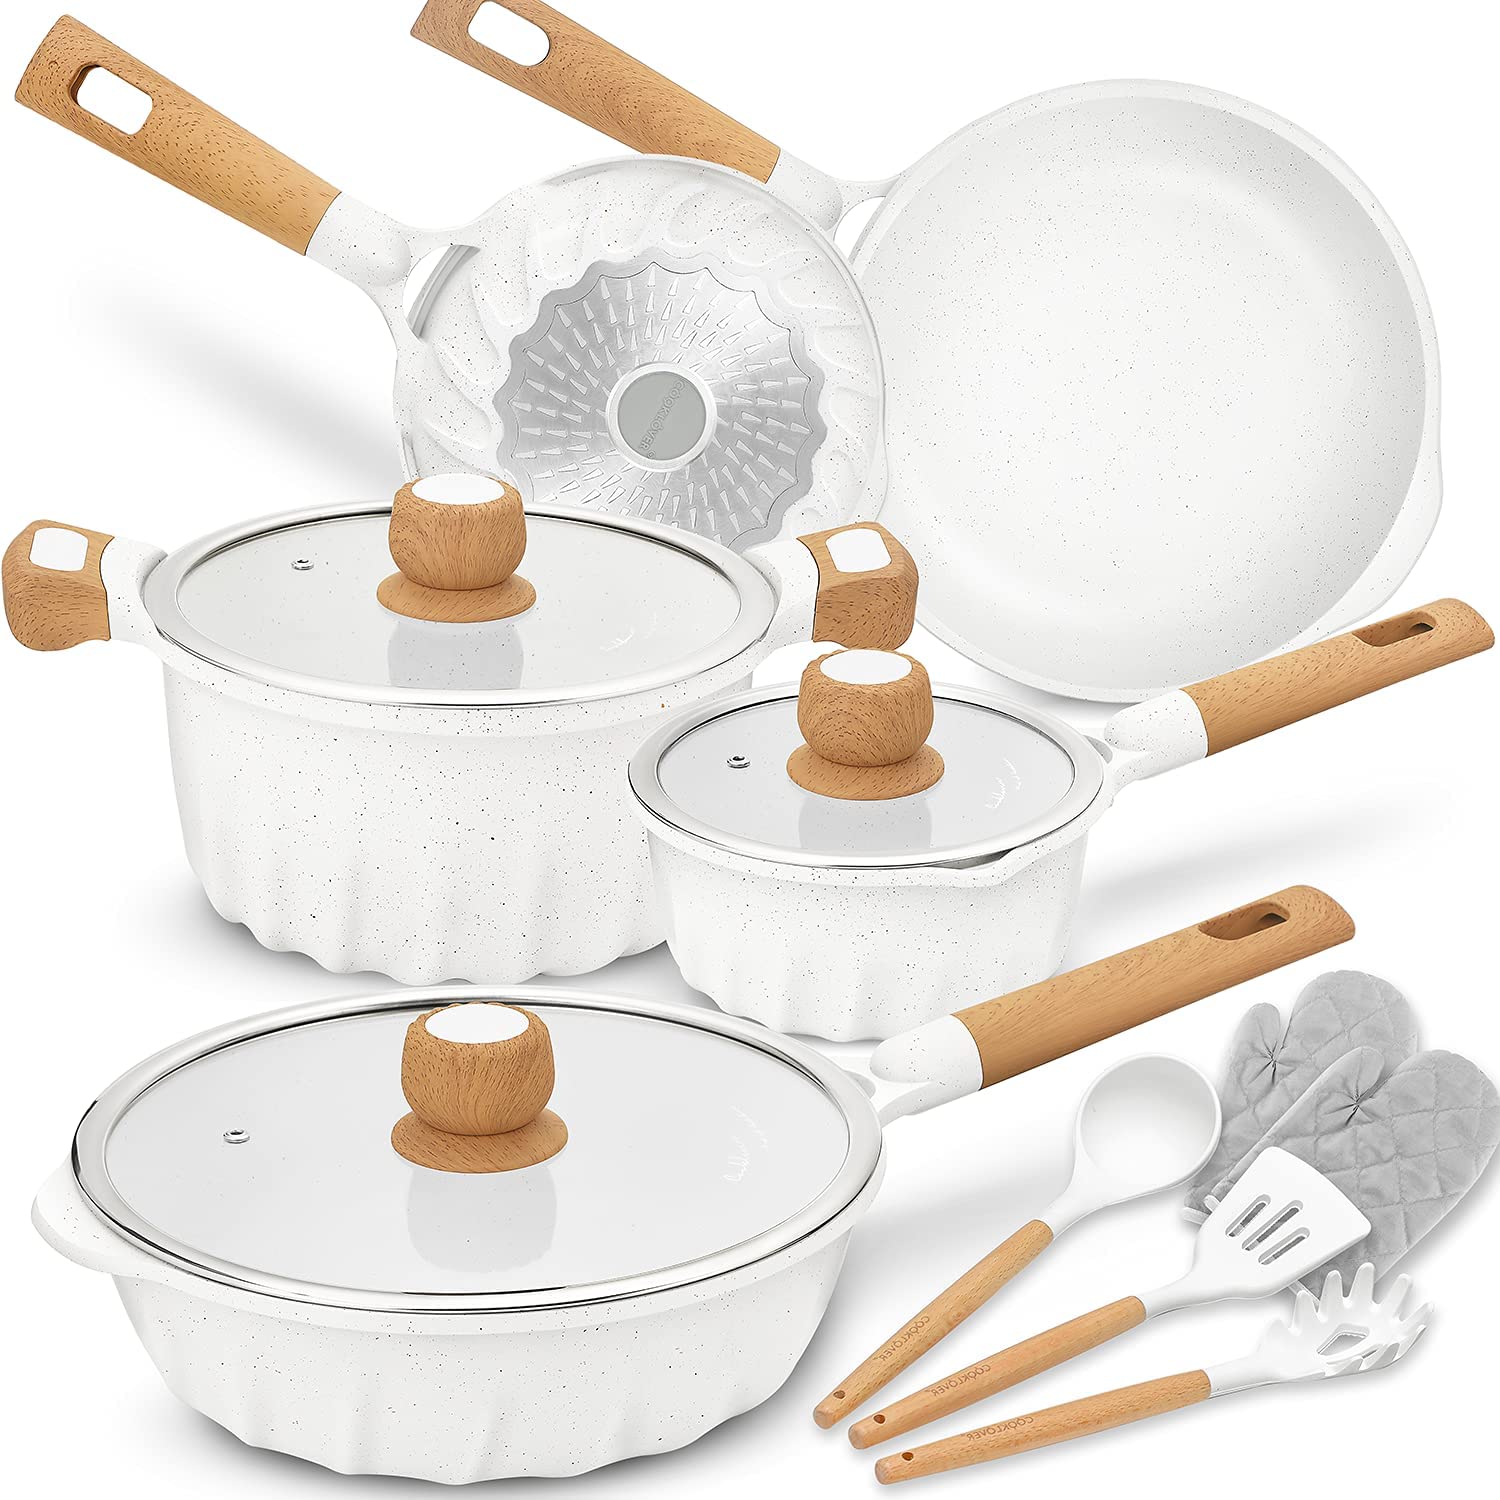 13 Piece Pots and Pans-Set Nonstick-Kitchen-Cookware with